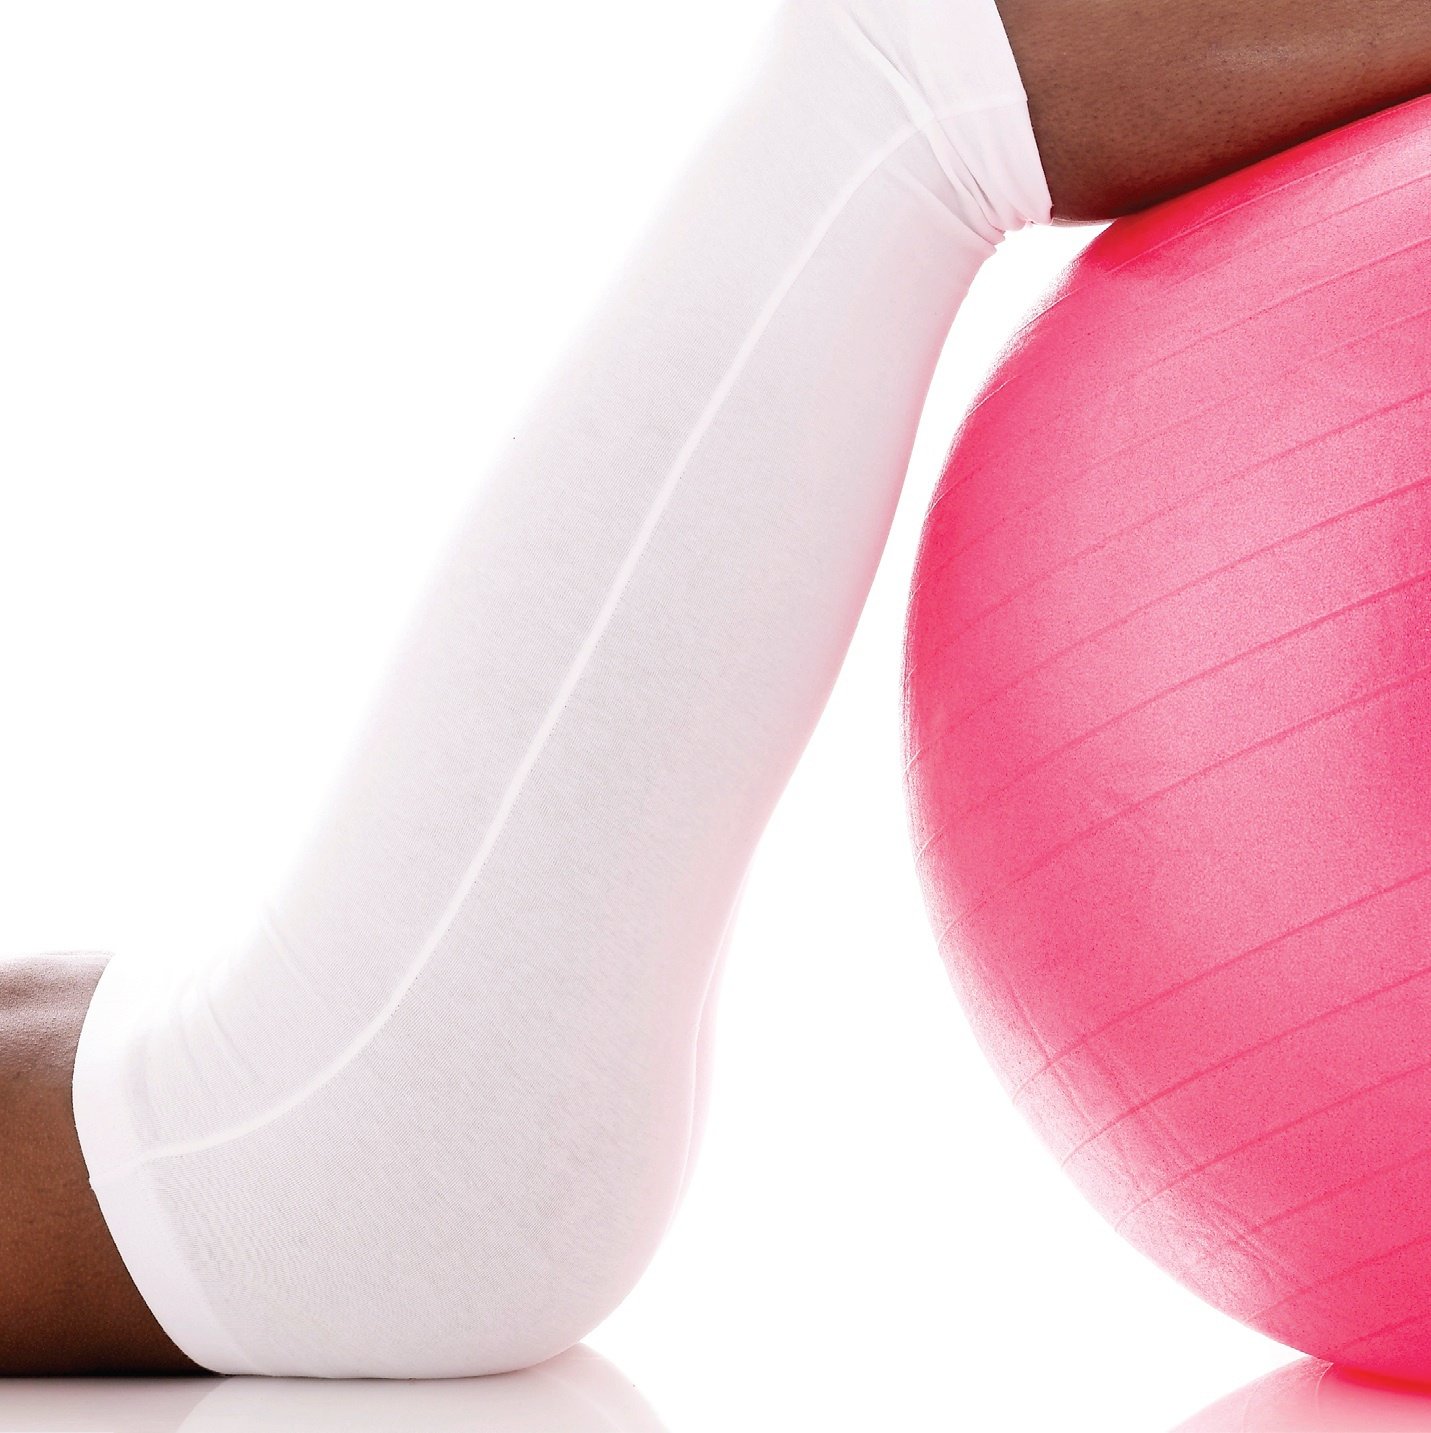 Legs, pink ball, exercise, white workout wear